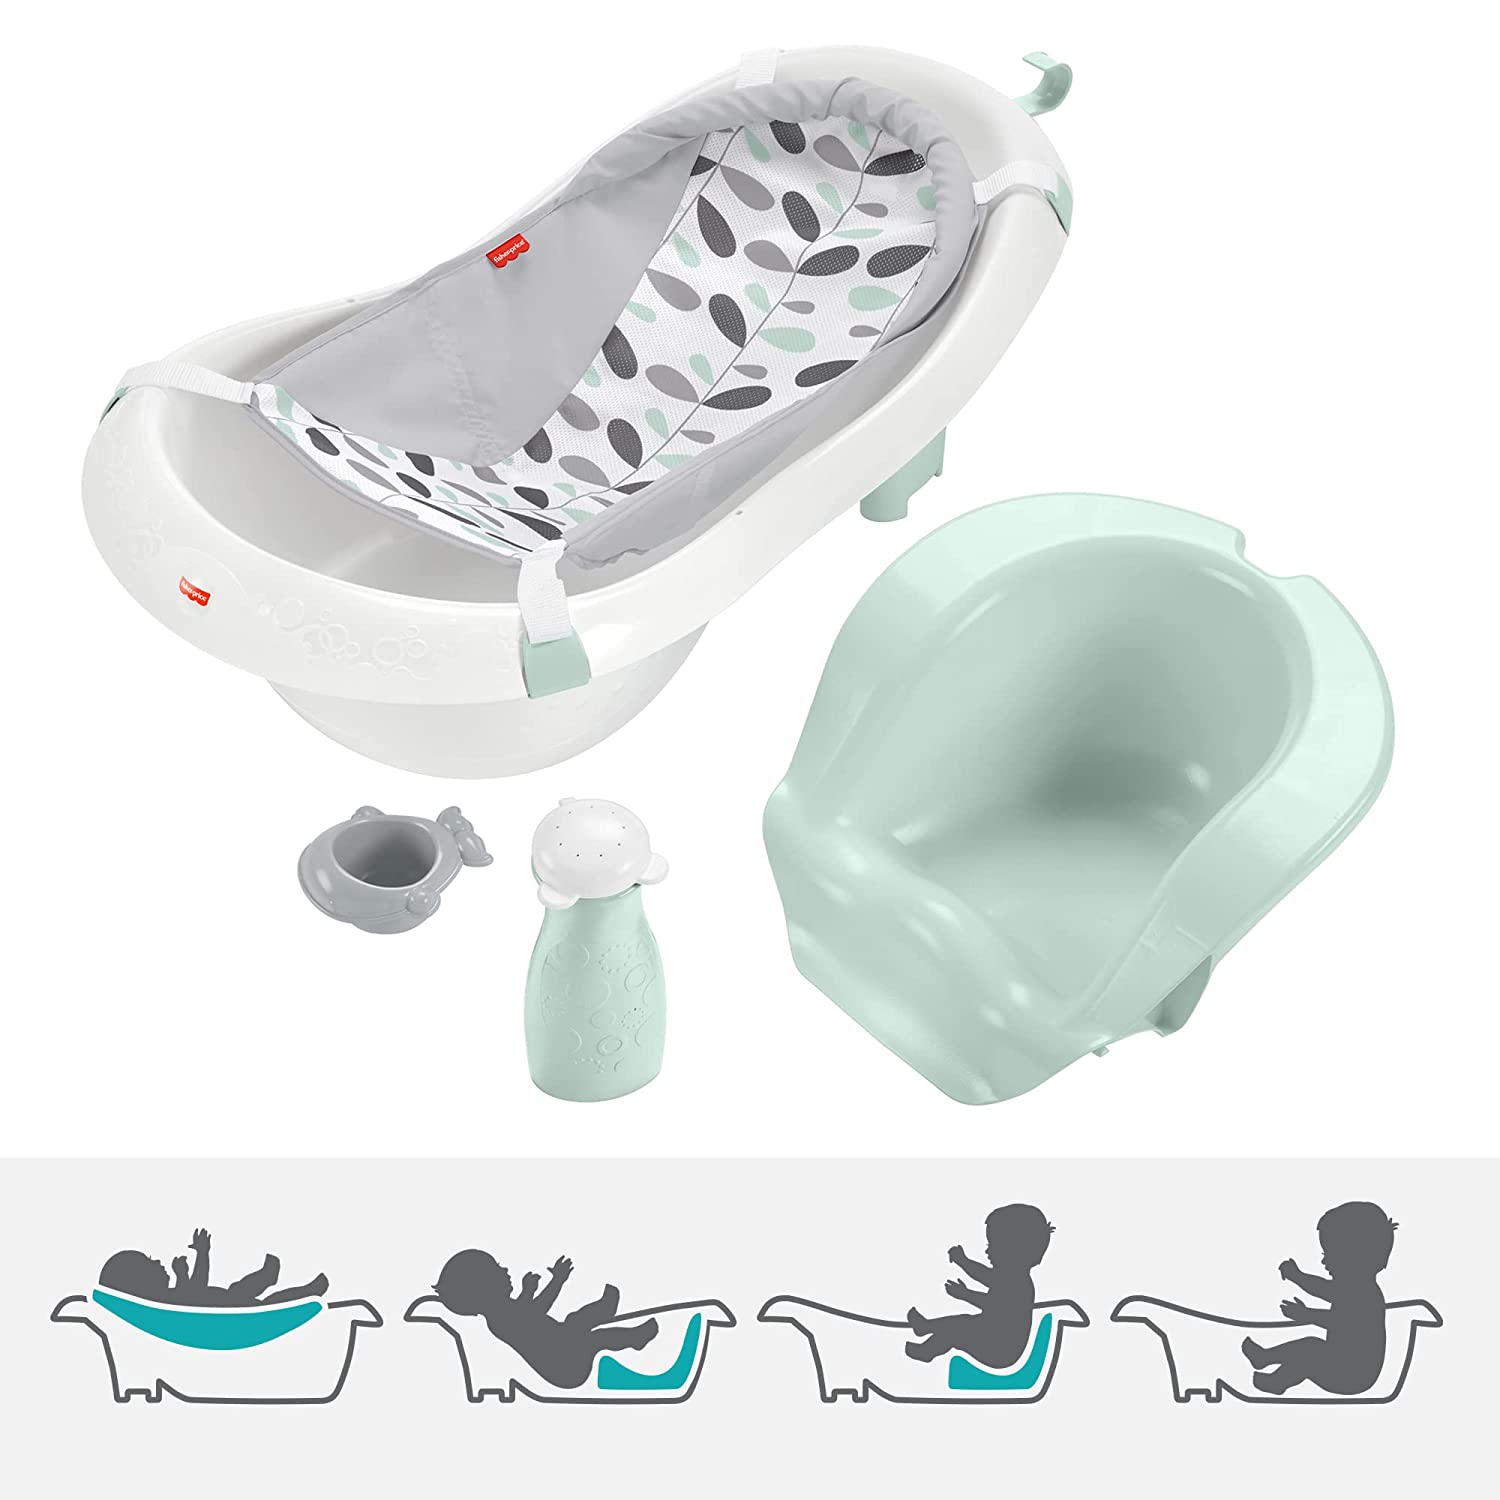 Fisher-Price 4-In-1 Sling ‘N Seat Tub – Climbing Leaves, Convertible Baby to Toddler Bath Tub with Support and Seat